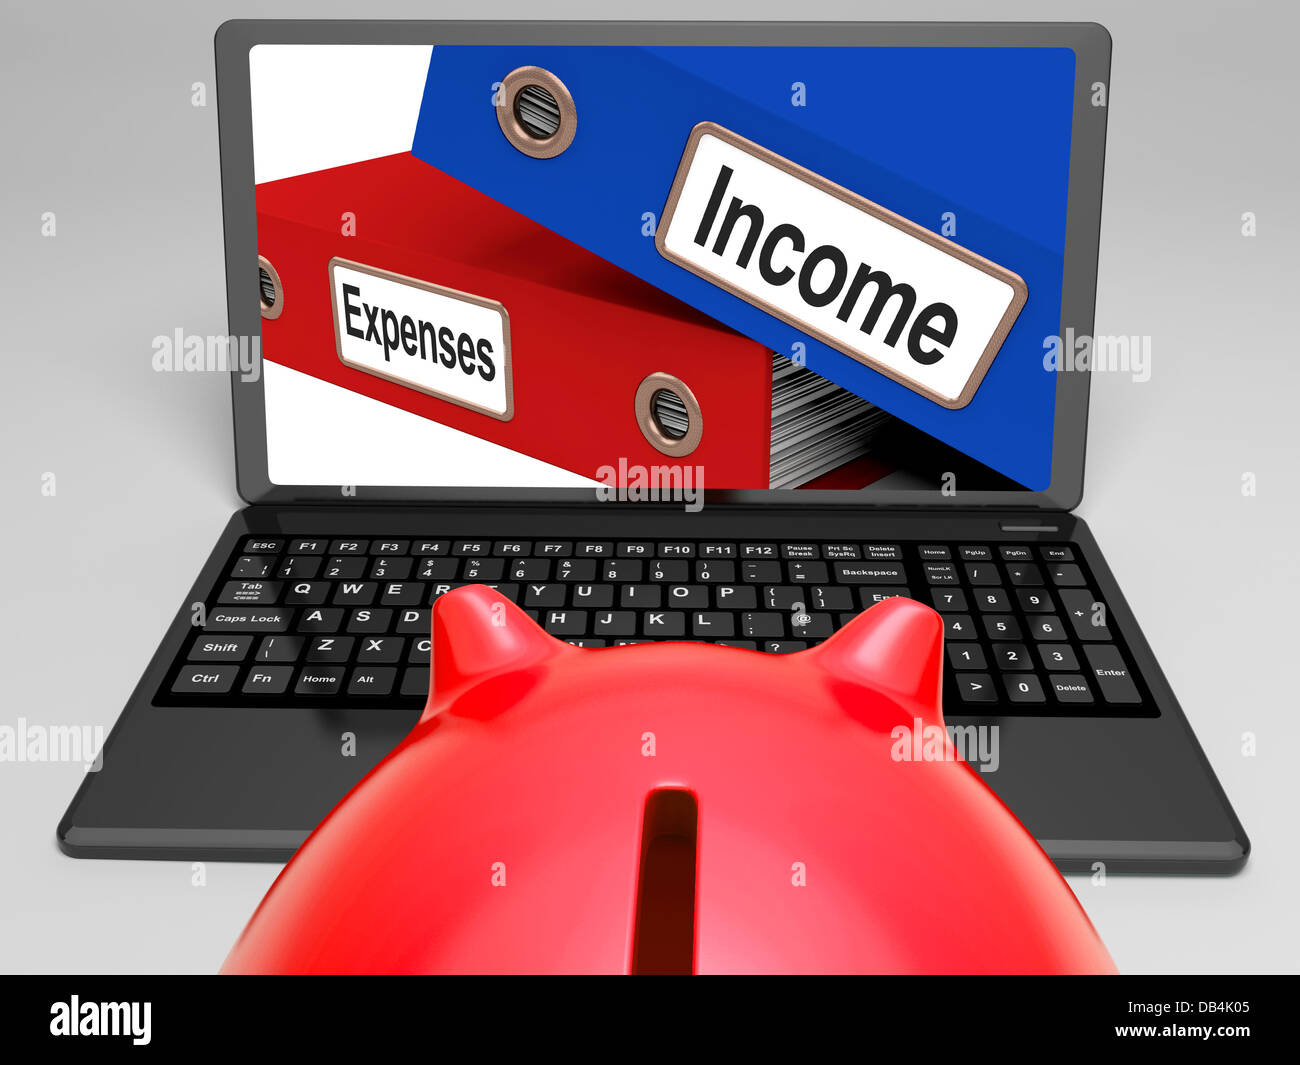 Incomes And Expenses Files On Laptop Showing Earnings Stock Photo